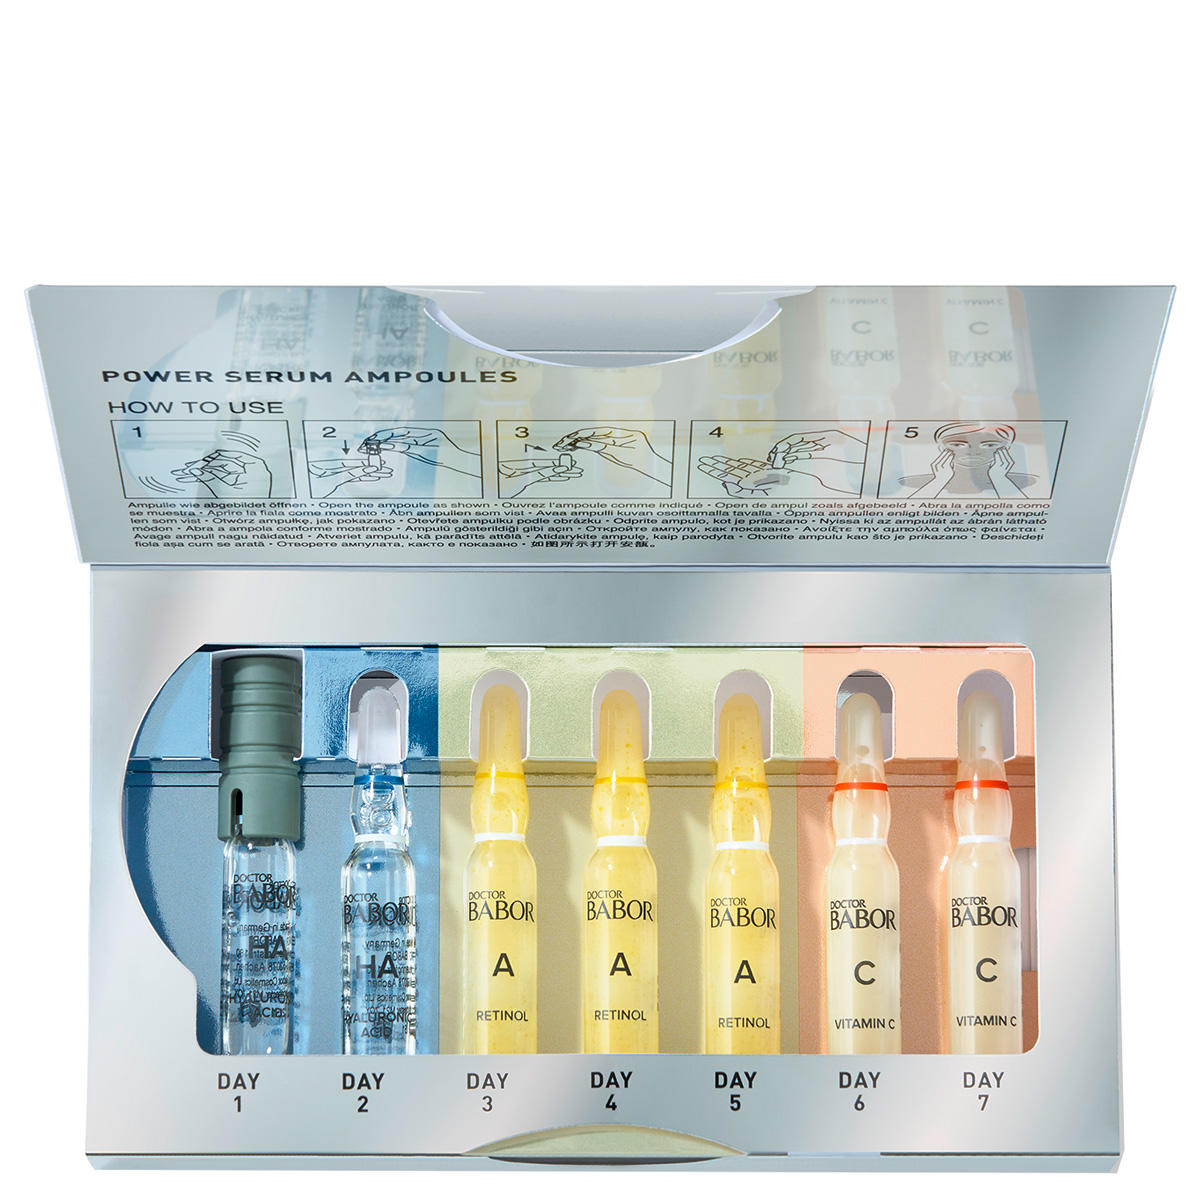 BABOR DOCTOR BABOR POWER SERUM AMPOULES TRIAL SET 7 x 2 ml - 2